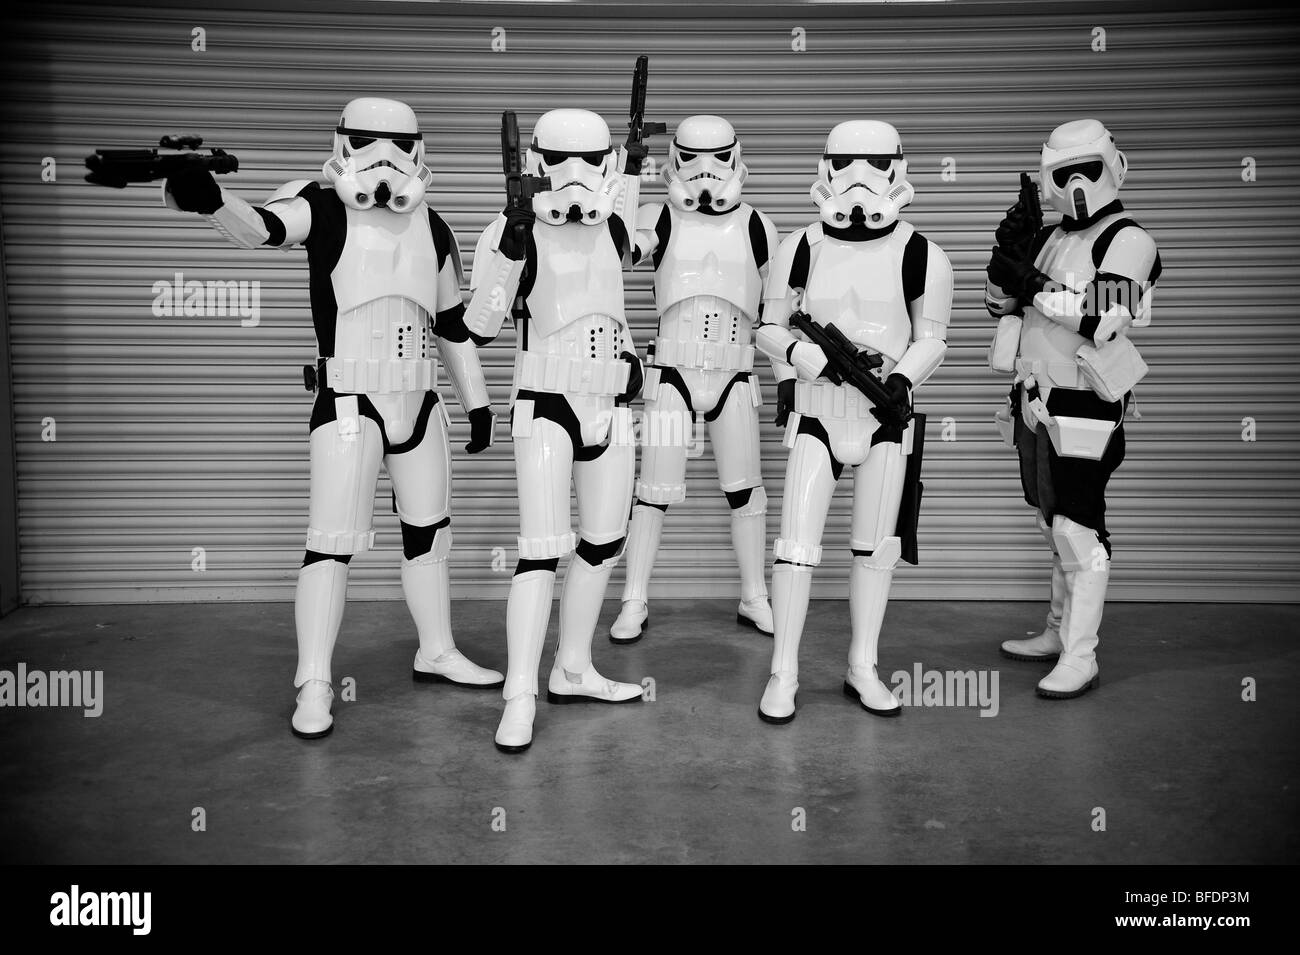 A squadron of Stormtroopers from the Star Wars universe line up ready for battle in front of a corrugated metal wall. Stock Photo